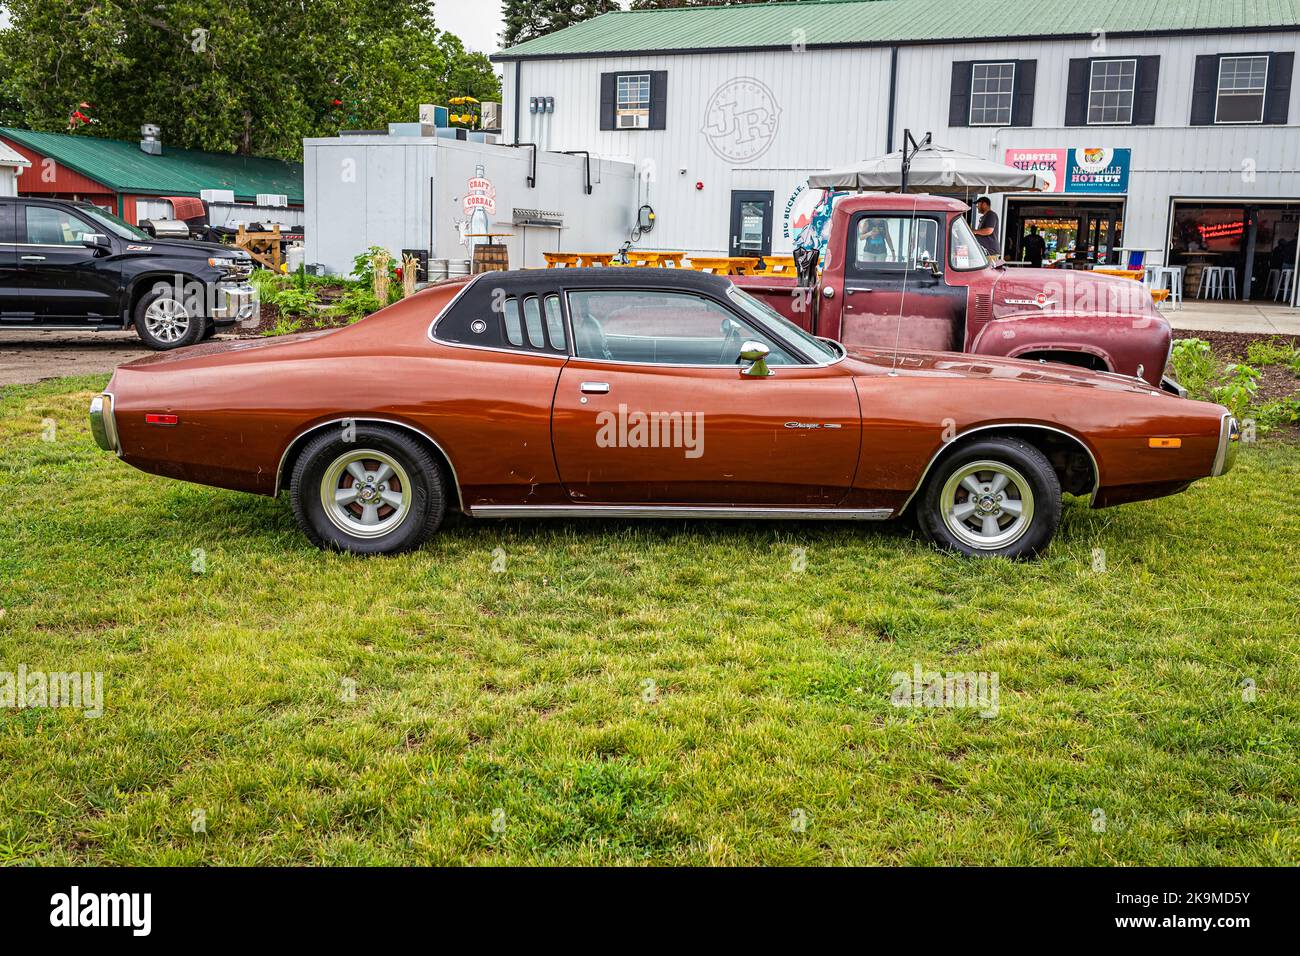 Des Moines, IA - July 01, 2022: High perspective side view of a 1973 Dodge Charger Hardtop Coupe at a local car show. Stock Photo